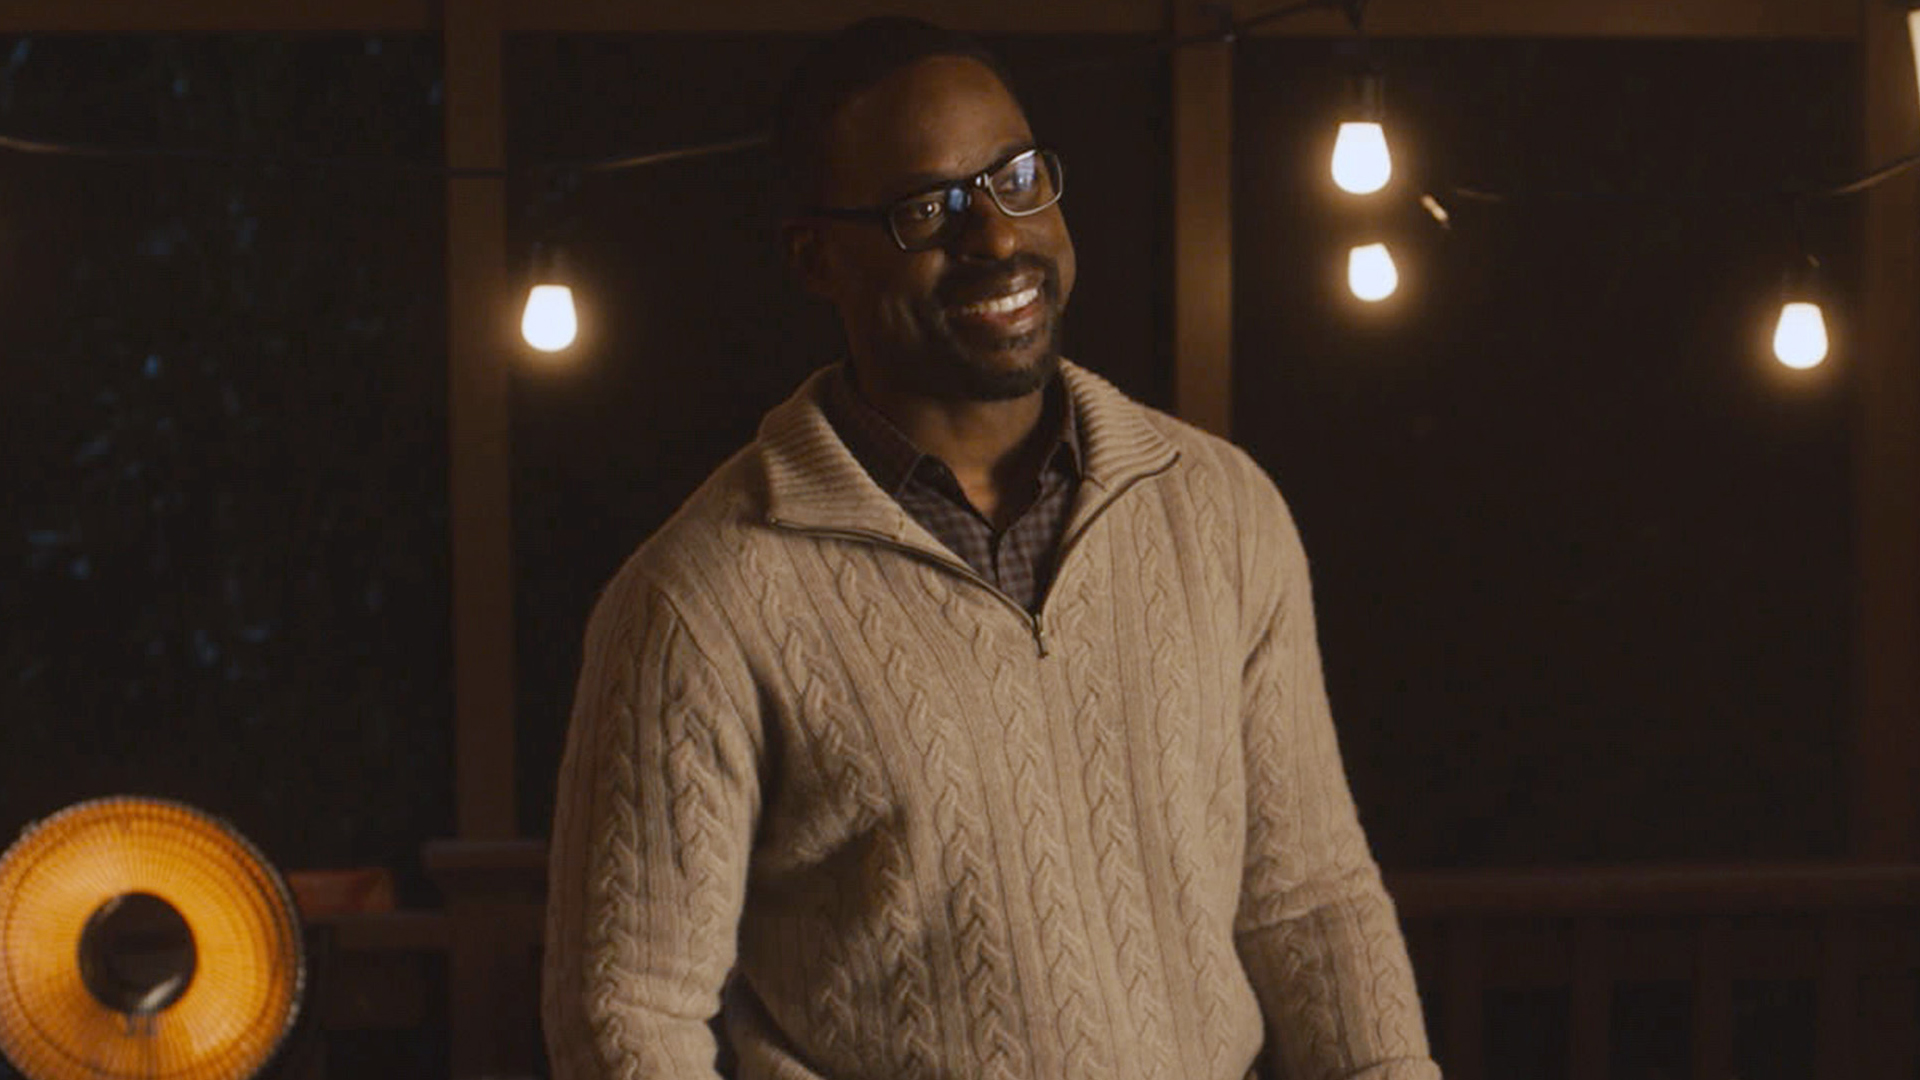 Sterling K. Brown as Randall Pearson laughing with Asante Blackk as Malik in ‘This Is Us’ Season 5 Episode 10, “I’ve Got This.”